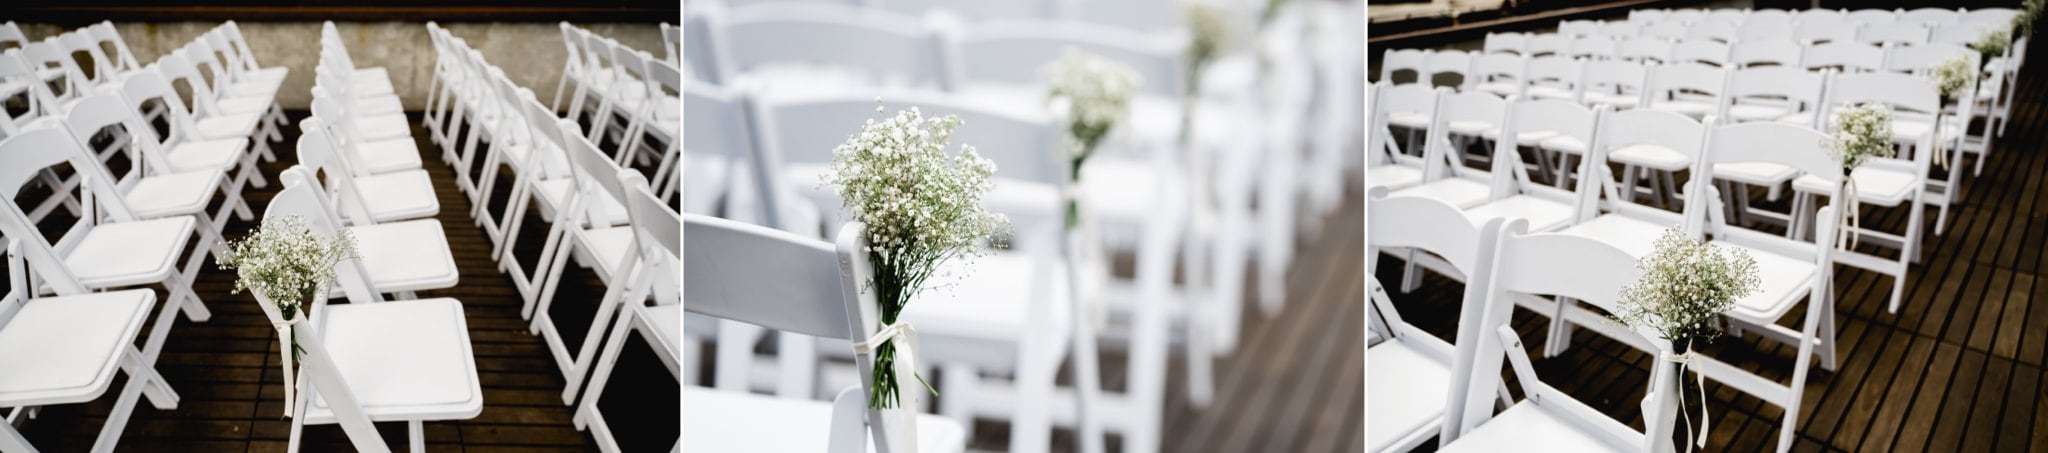 rooftop wedding details at fremont foundry seattle